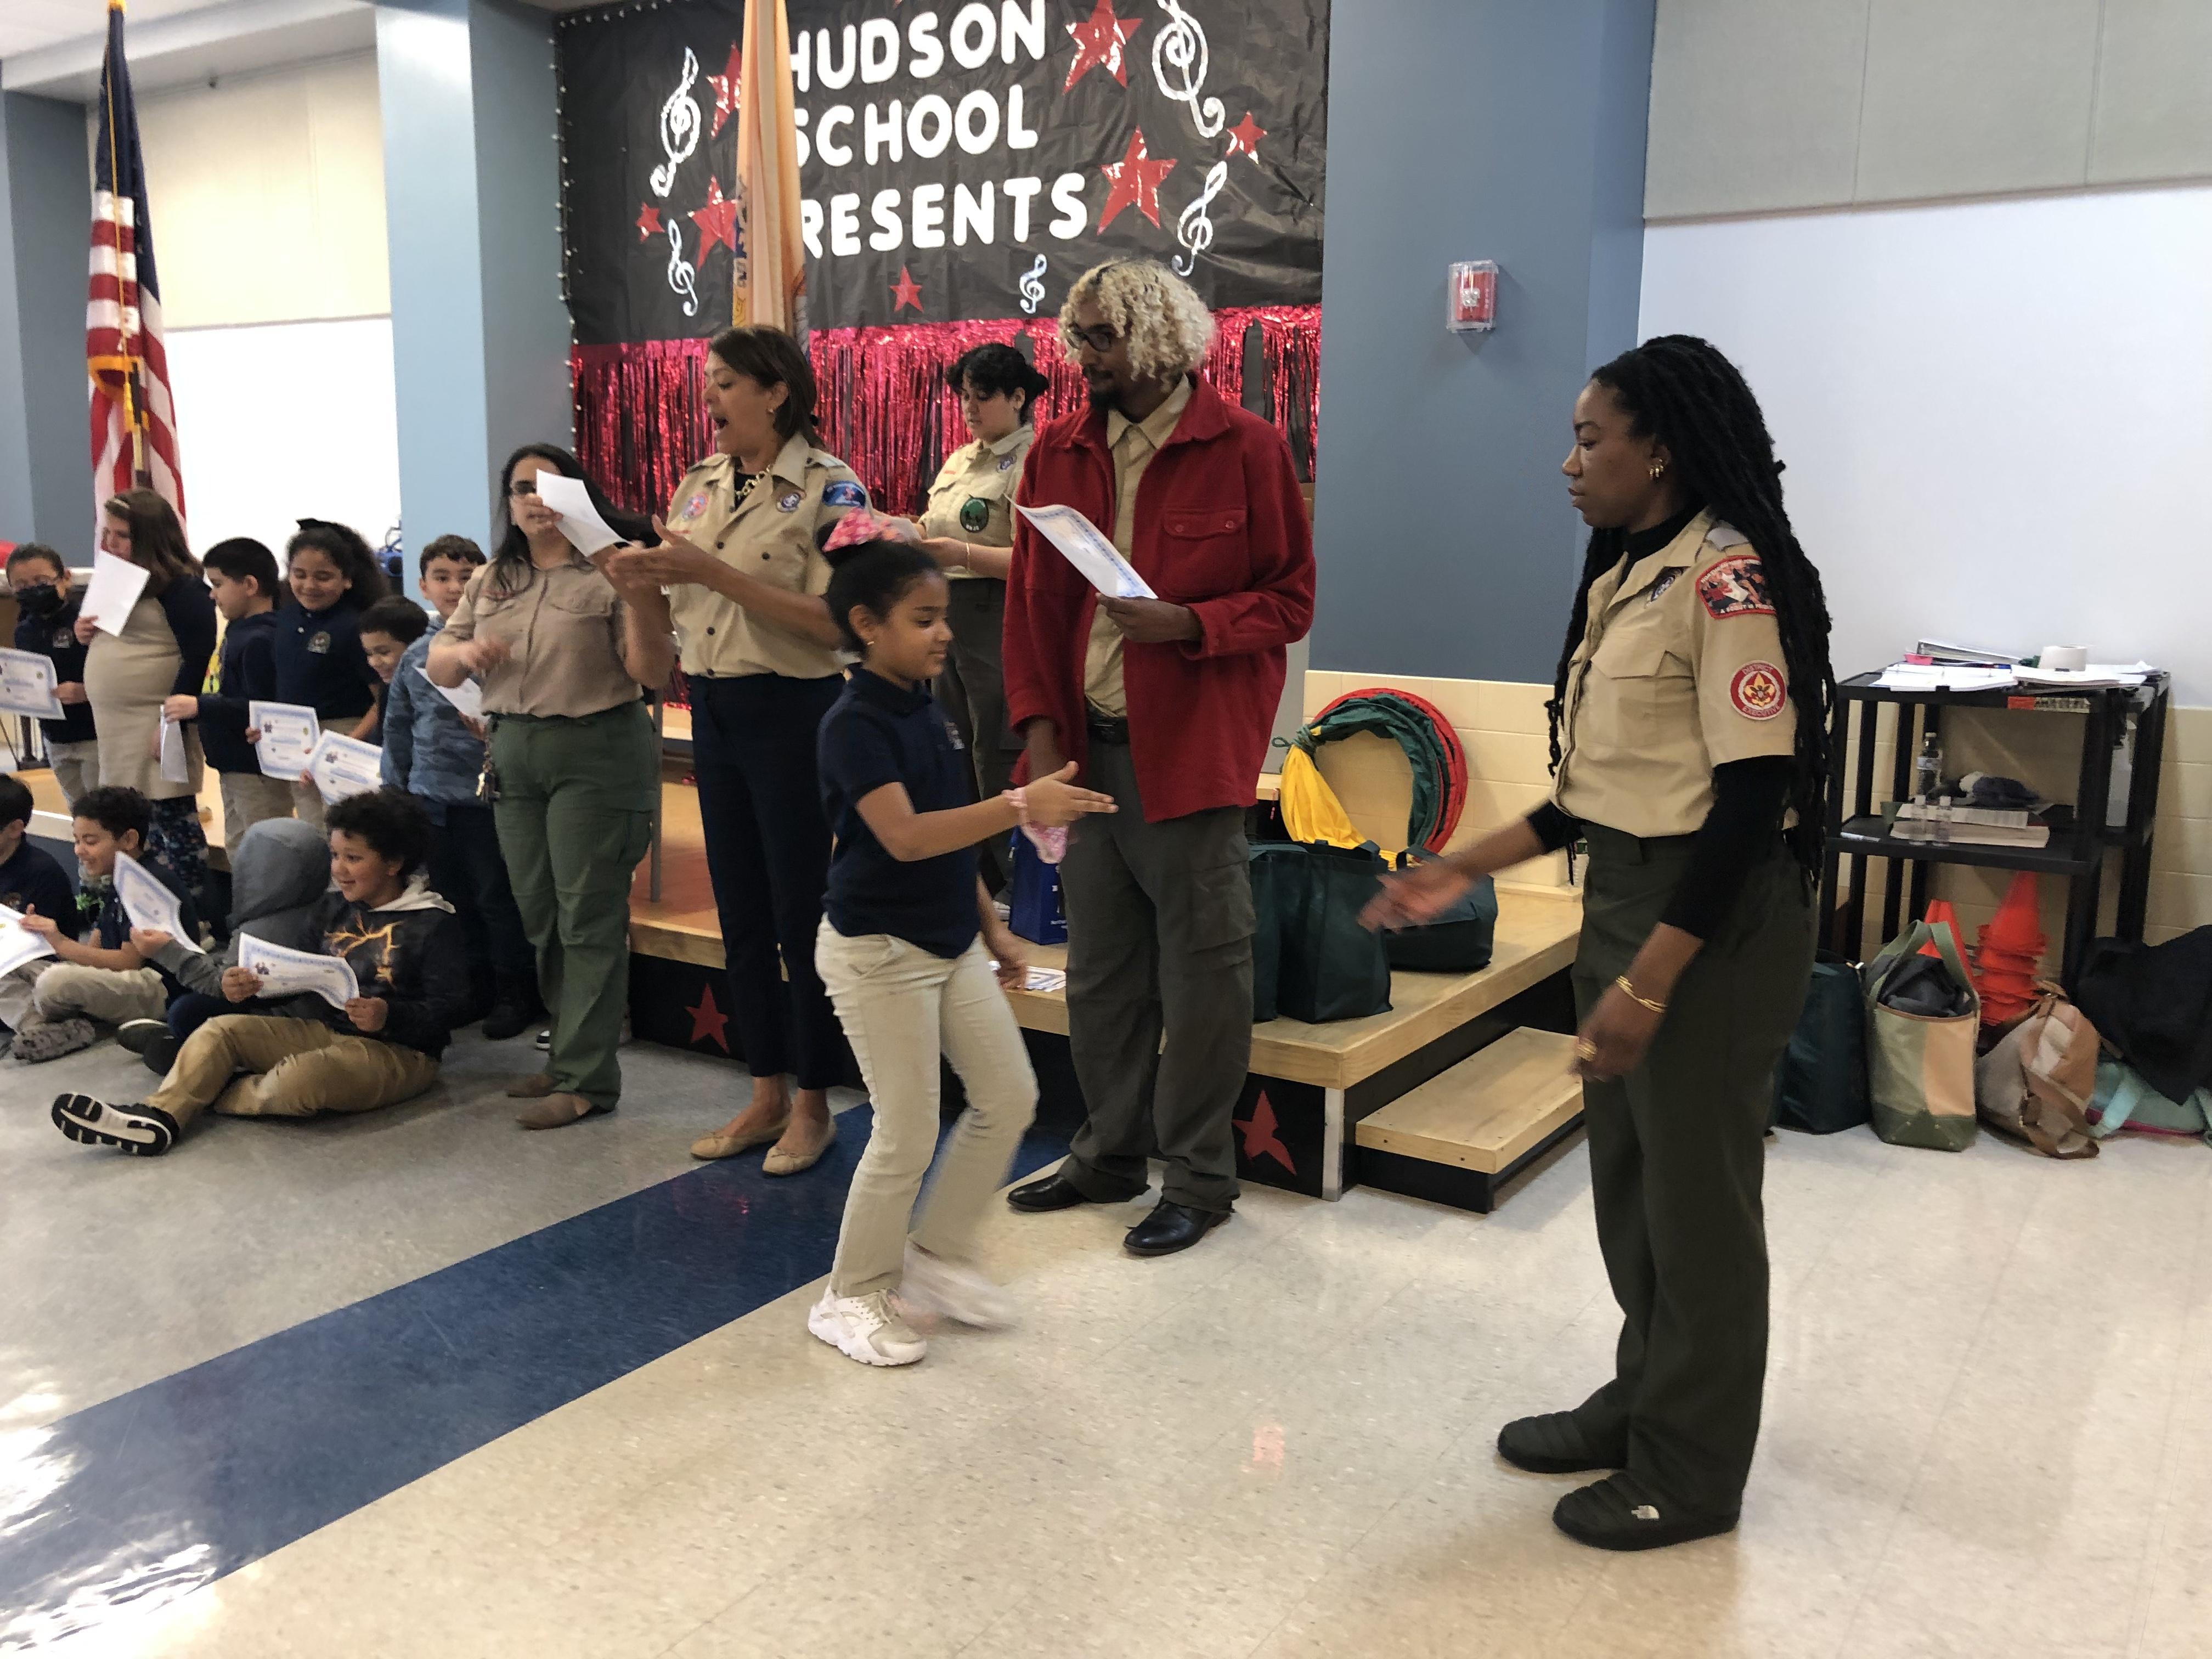 Cub Scouts Ceremony at Hudson School #5